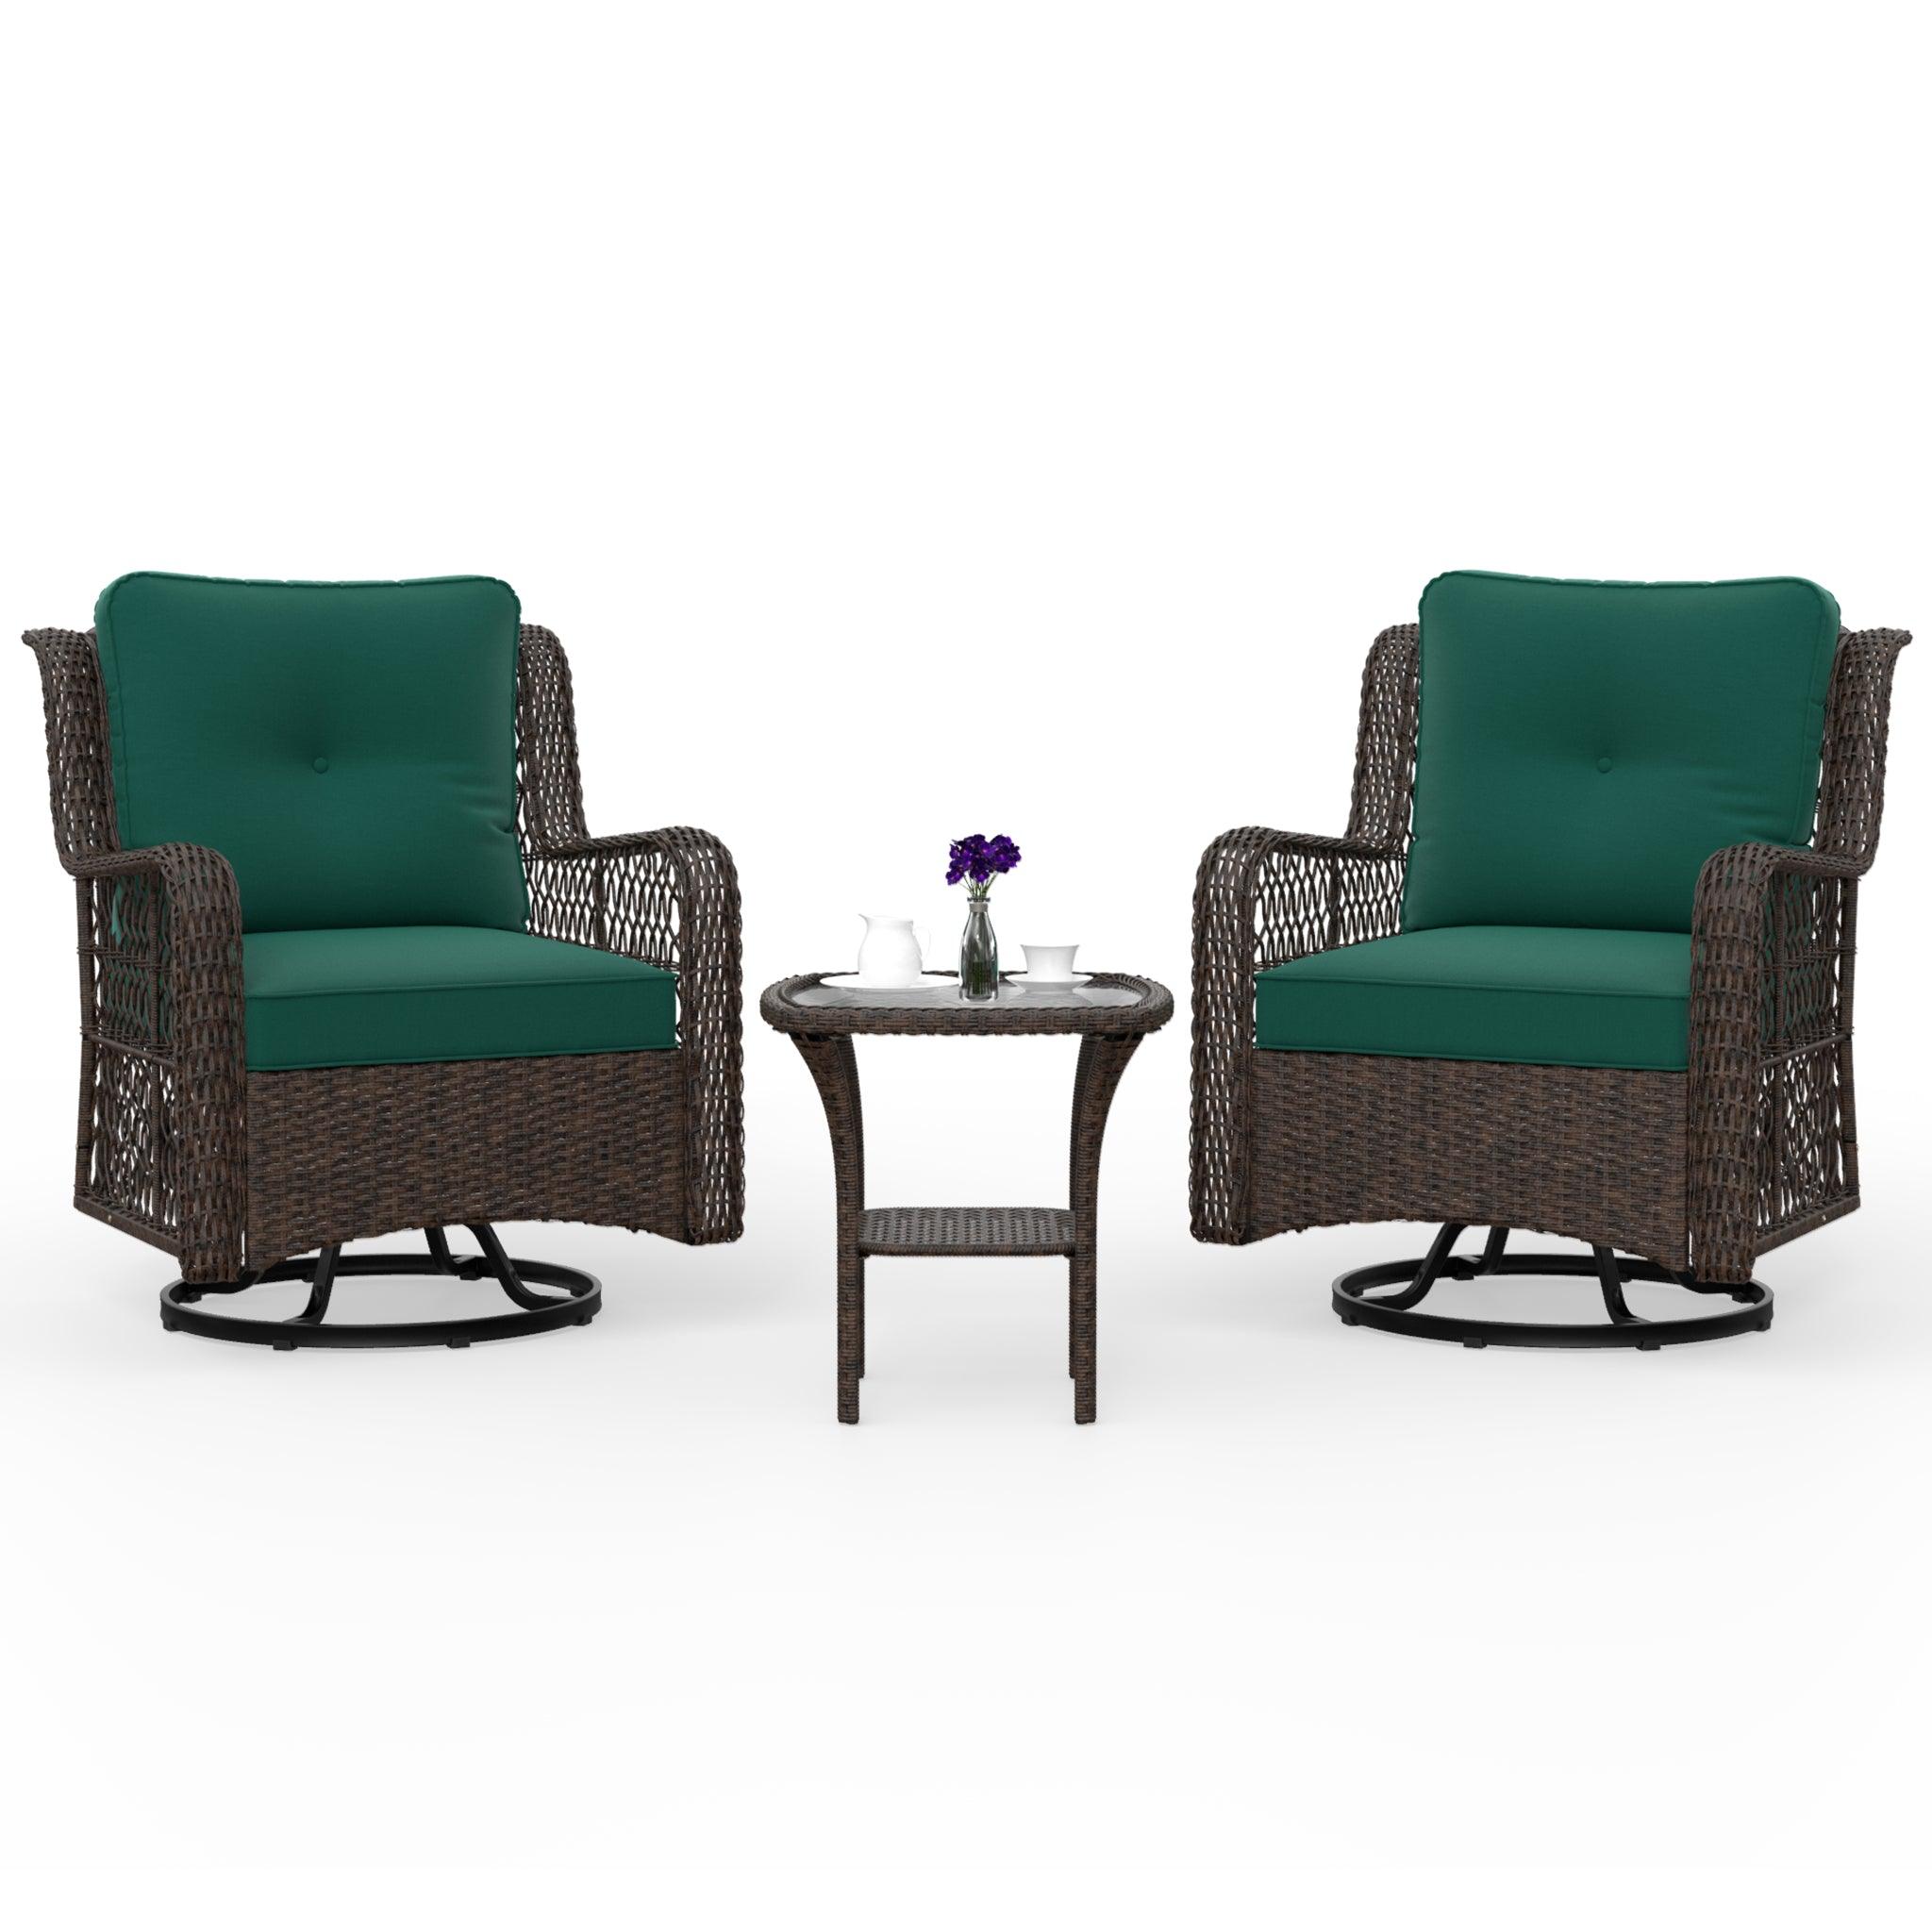 RaDEWAY Outdoor Wicker Patio Bistro Set with Side Table with Cushions